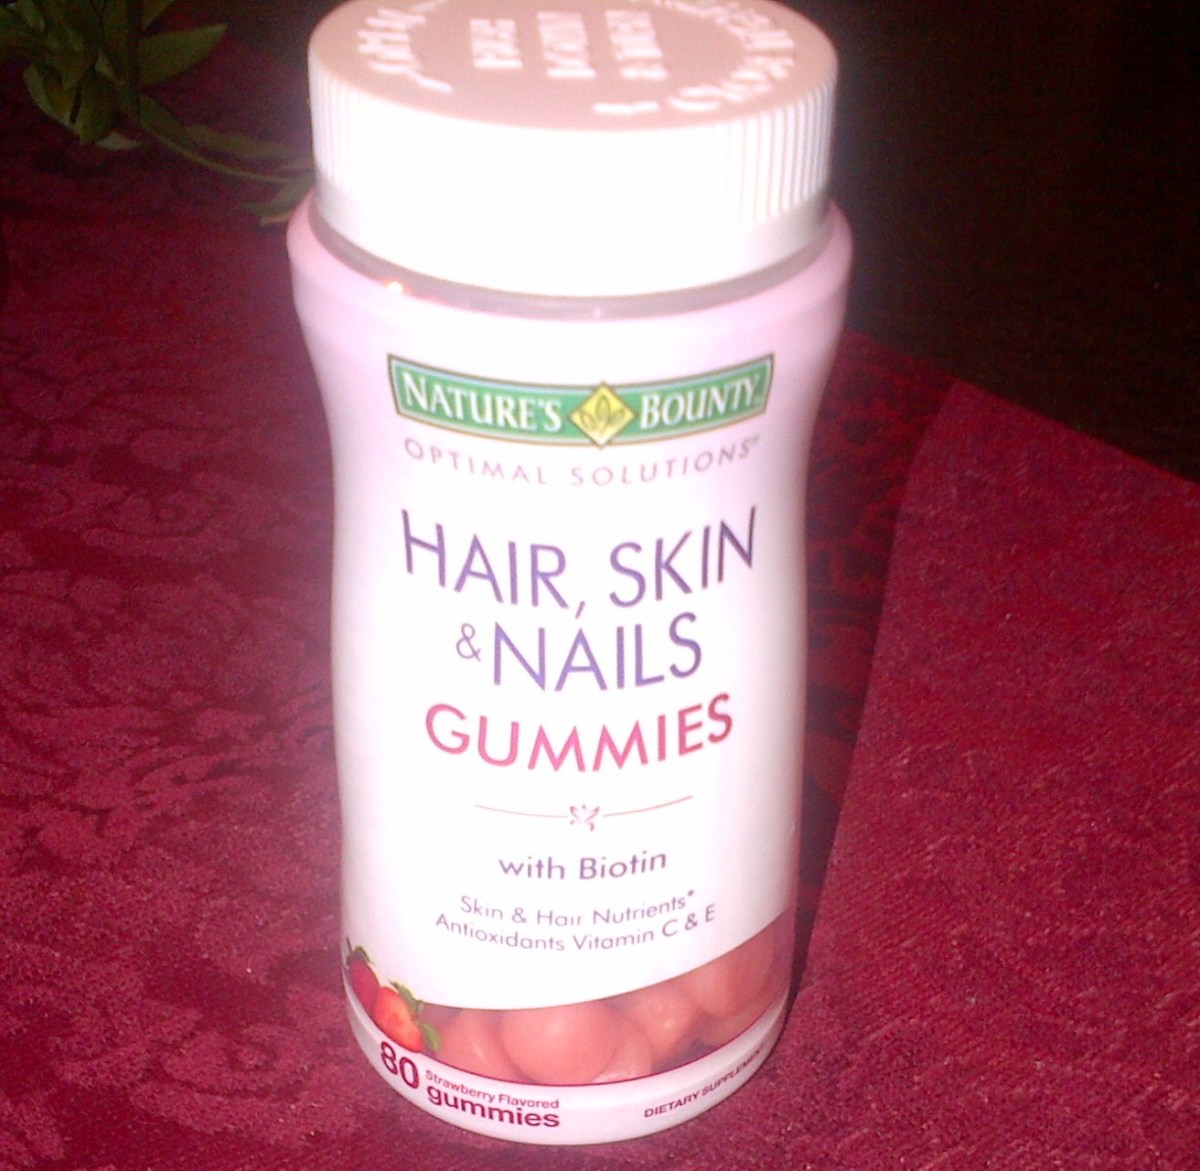 Nature's Bounty Hair, Skin & Nails Gummies Review